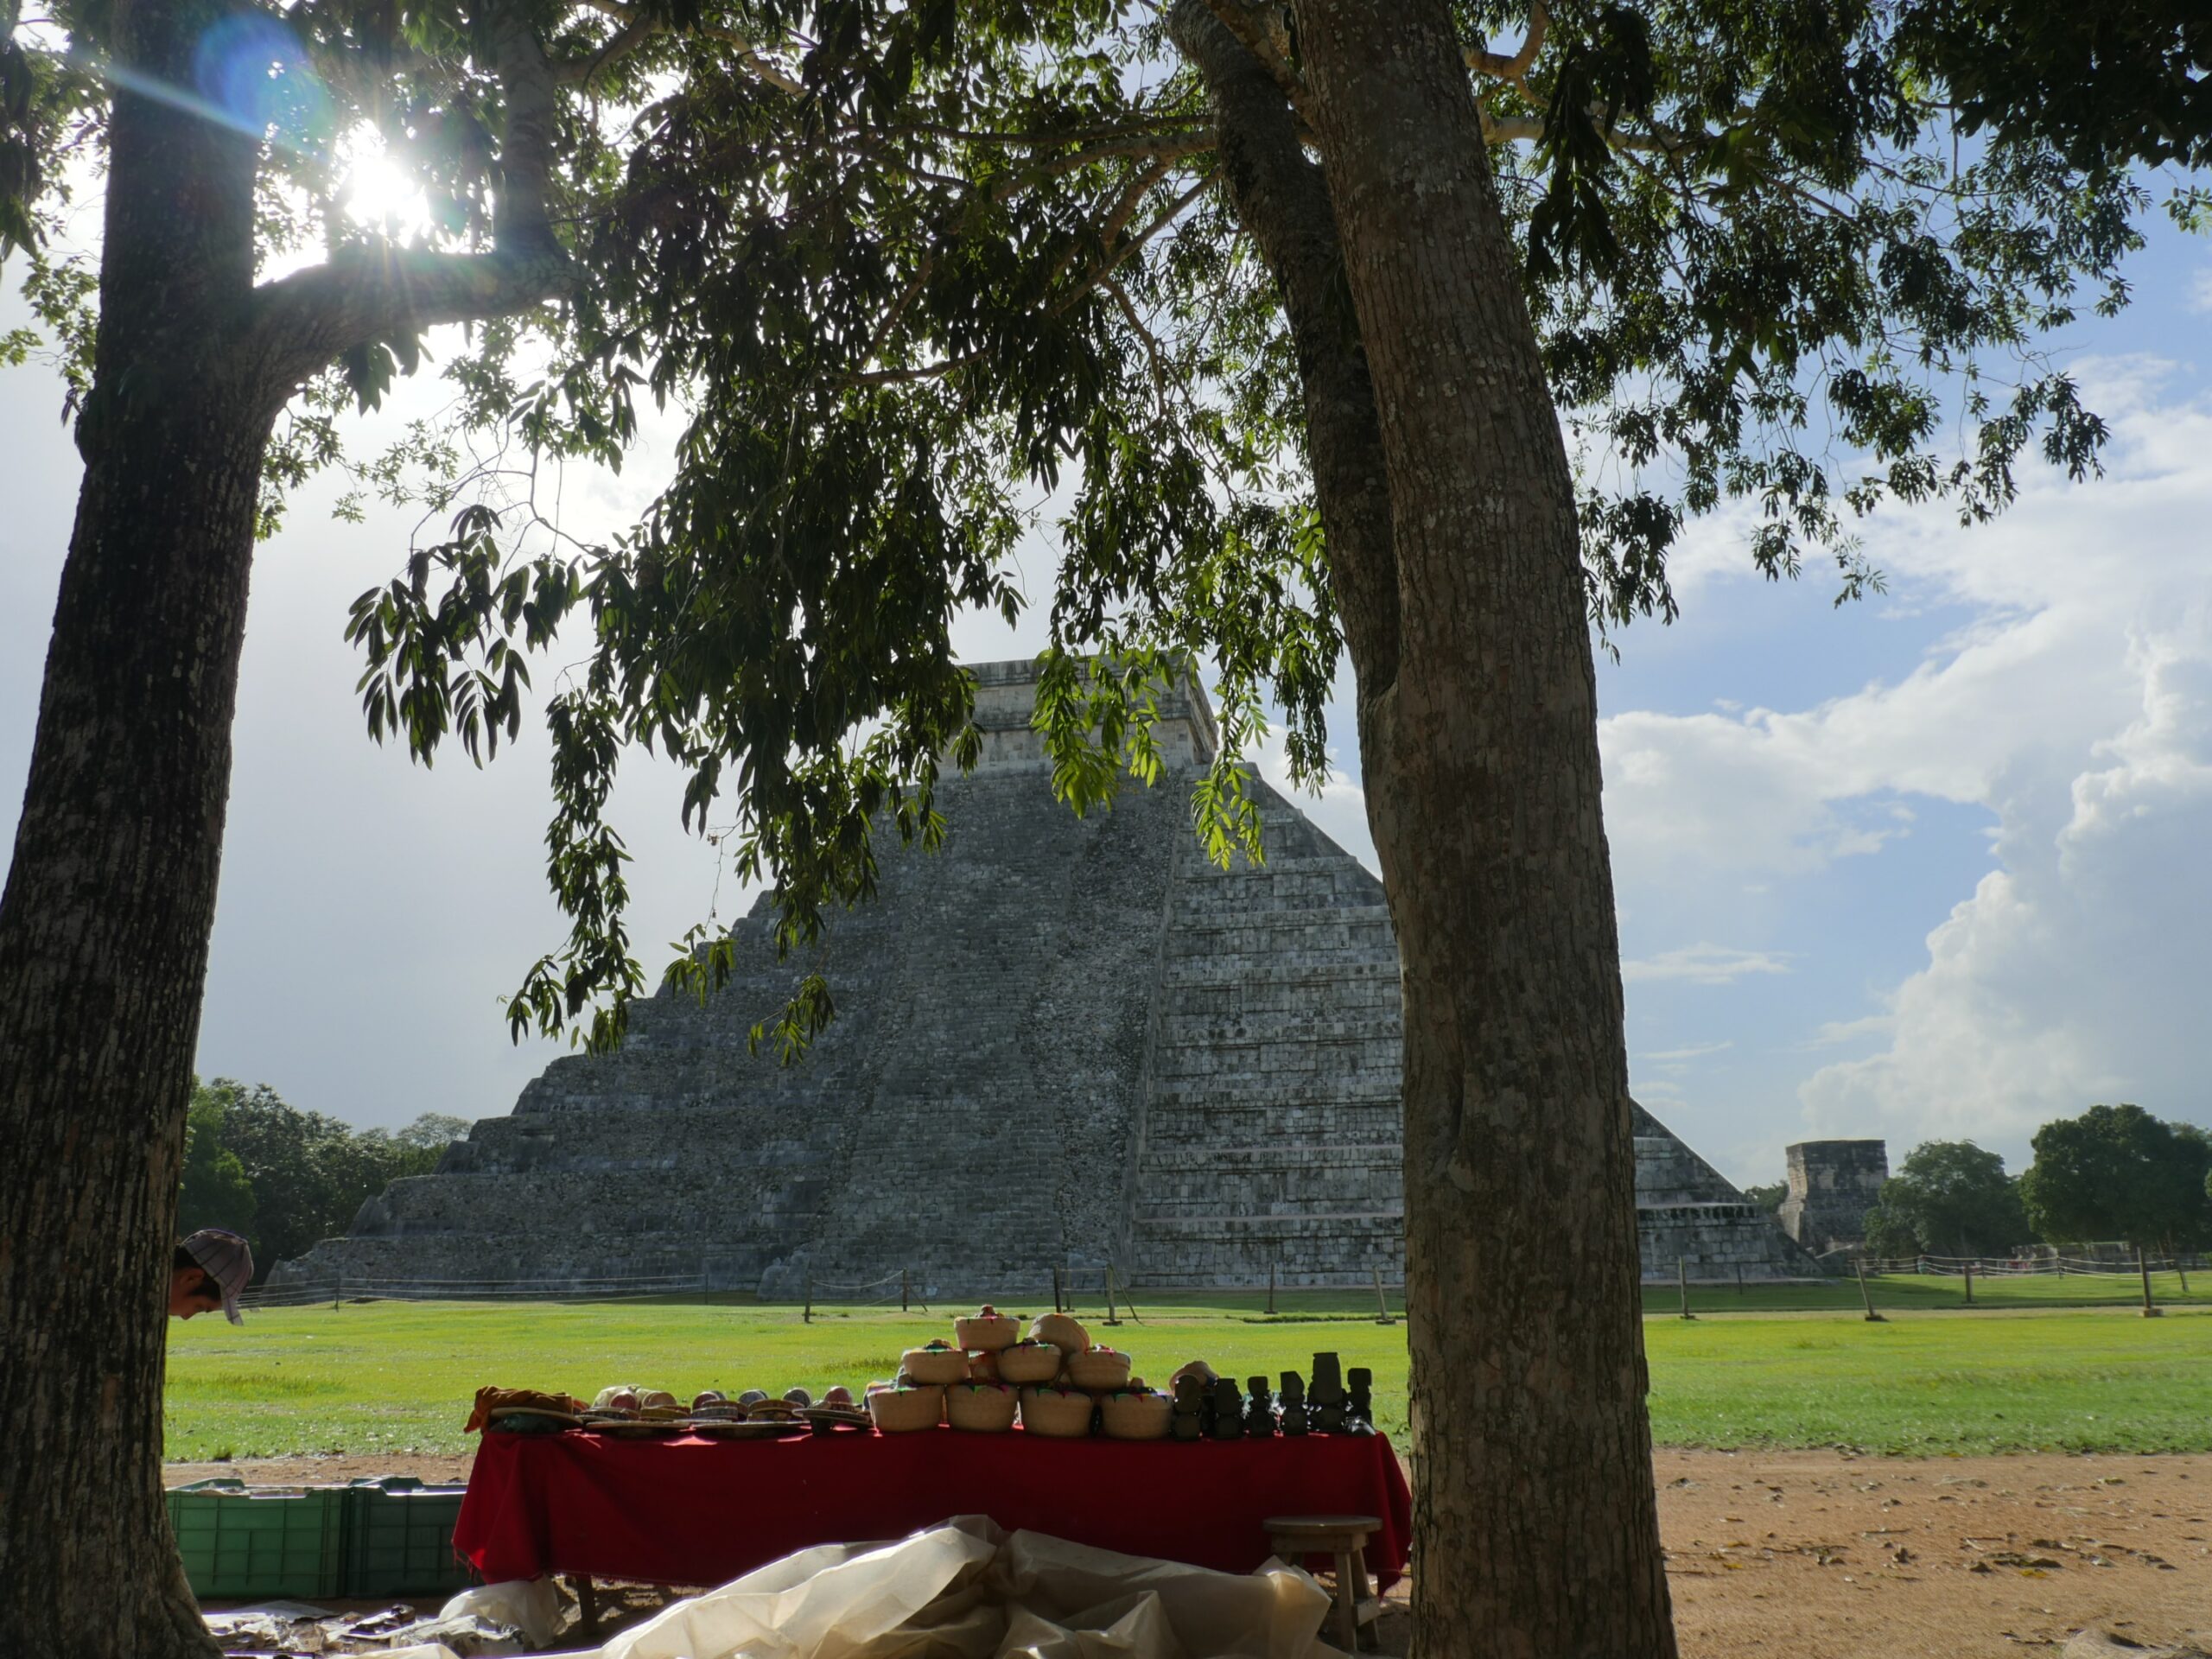 A single souvenir vendor remains at the end of the day in the ancient Mayan city of Chichen Itza, Mexico.